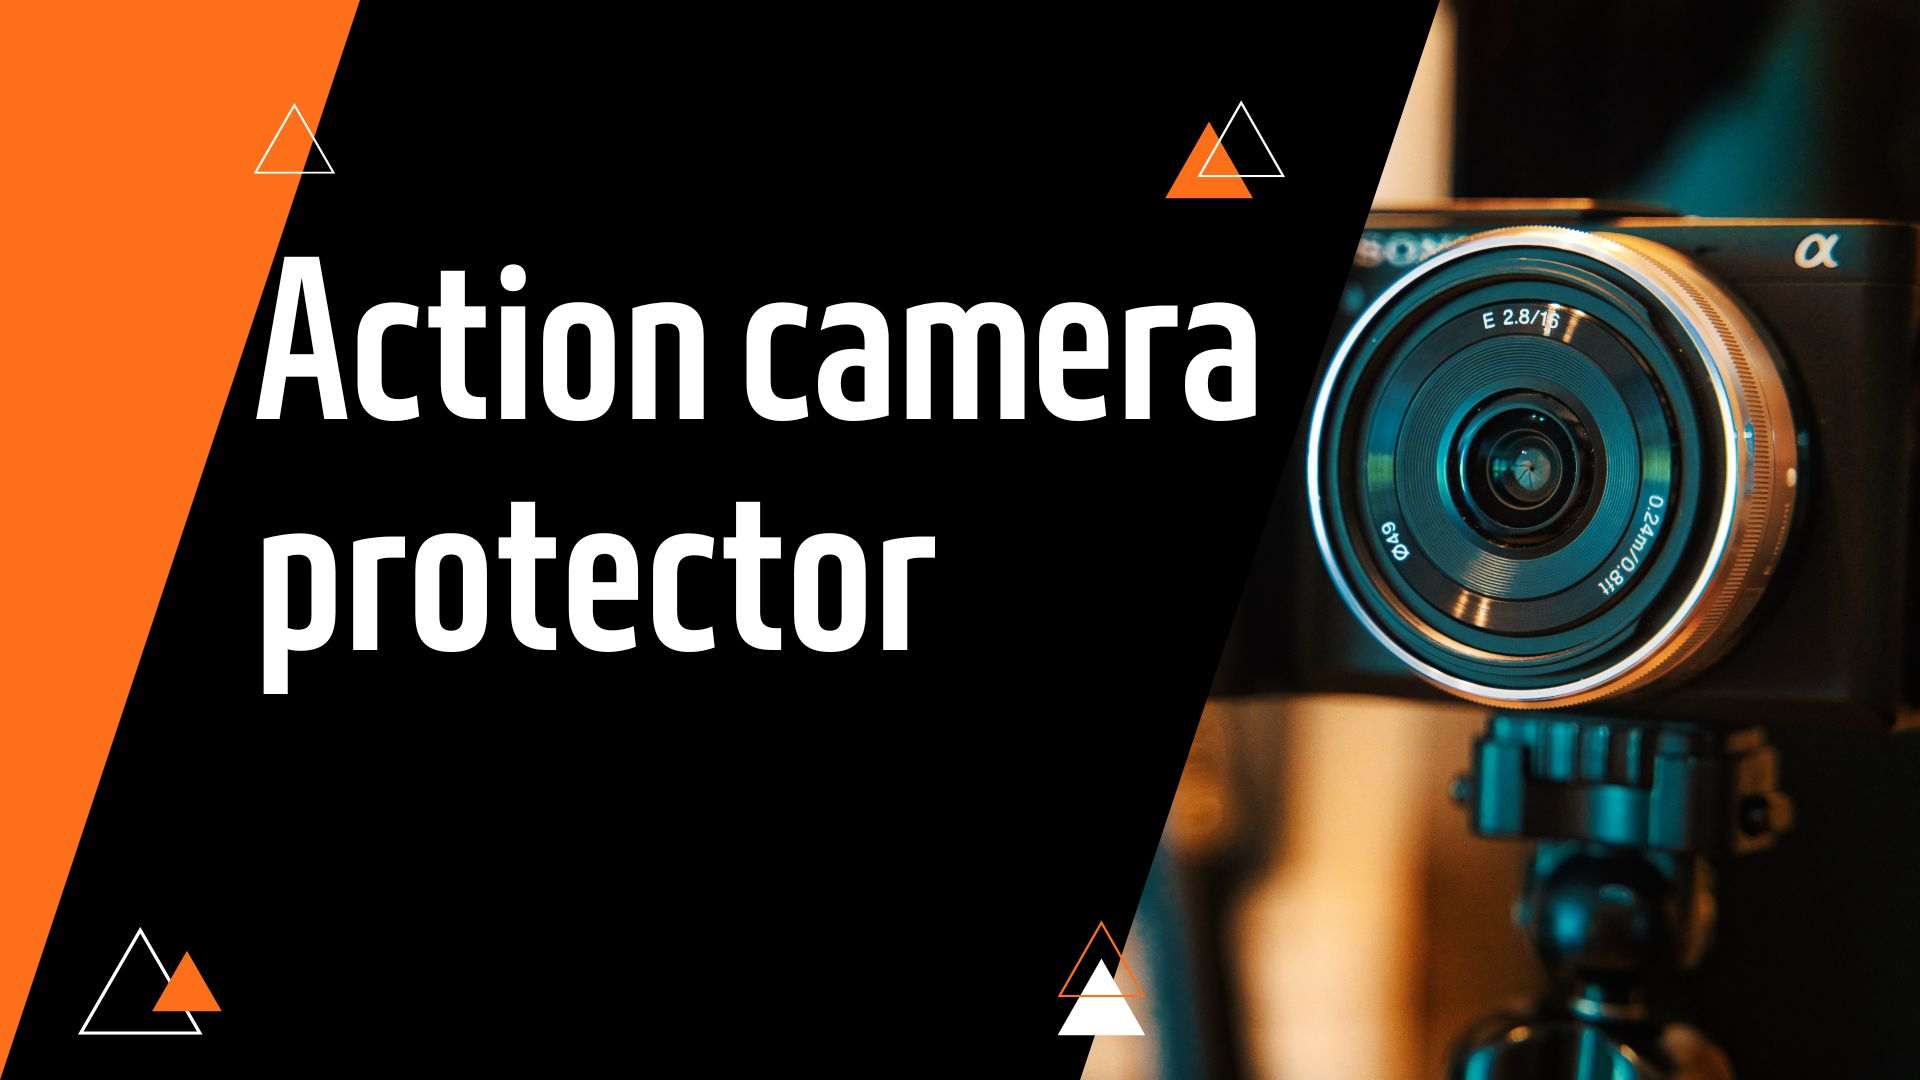 Best Action camera protector: Things to Consider & Features